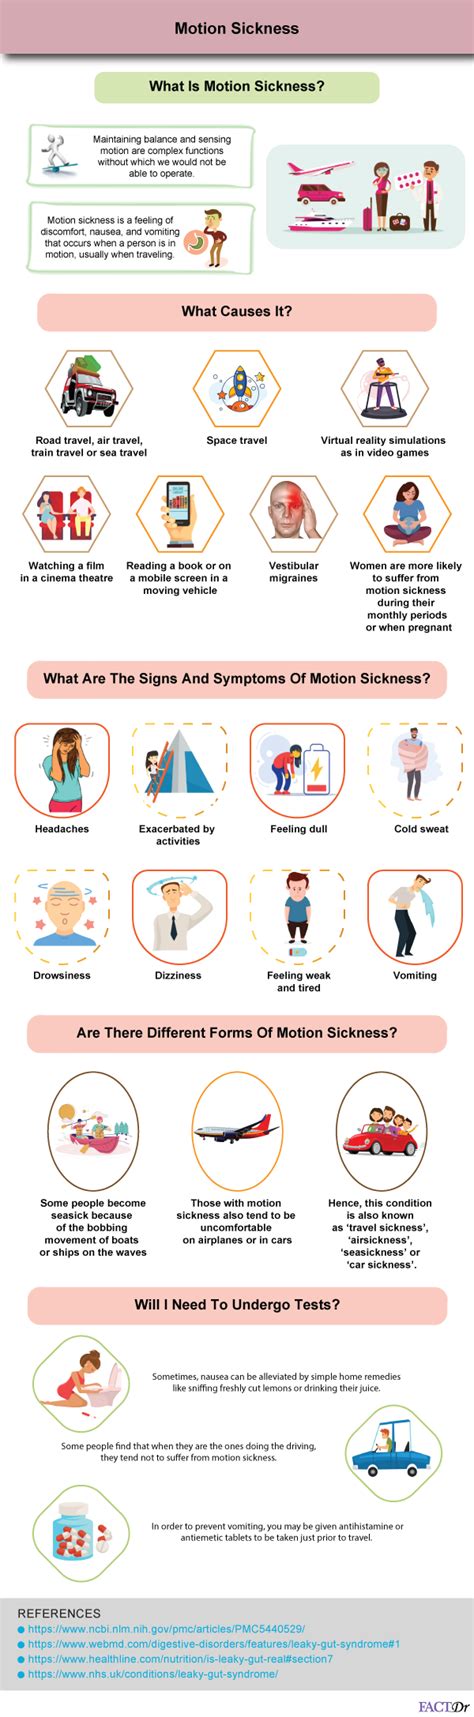 Motion Sickness Facts Causes Treatment And Management Factdr